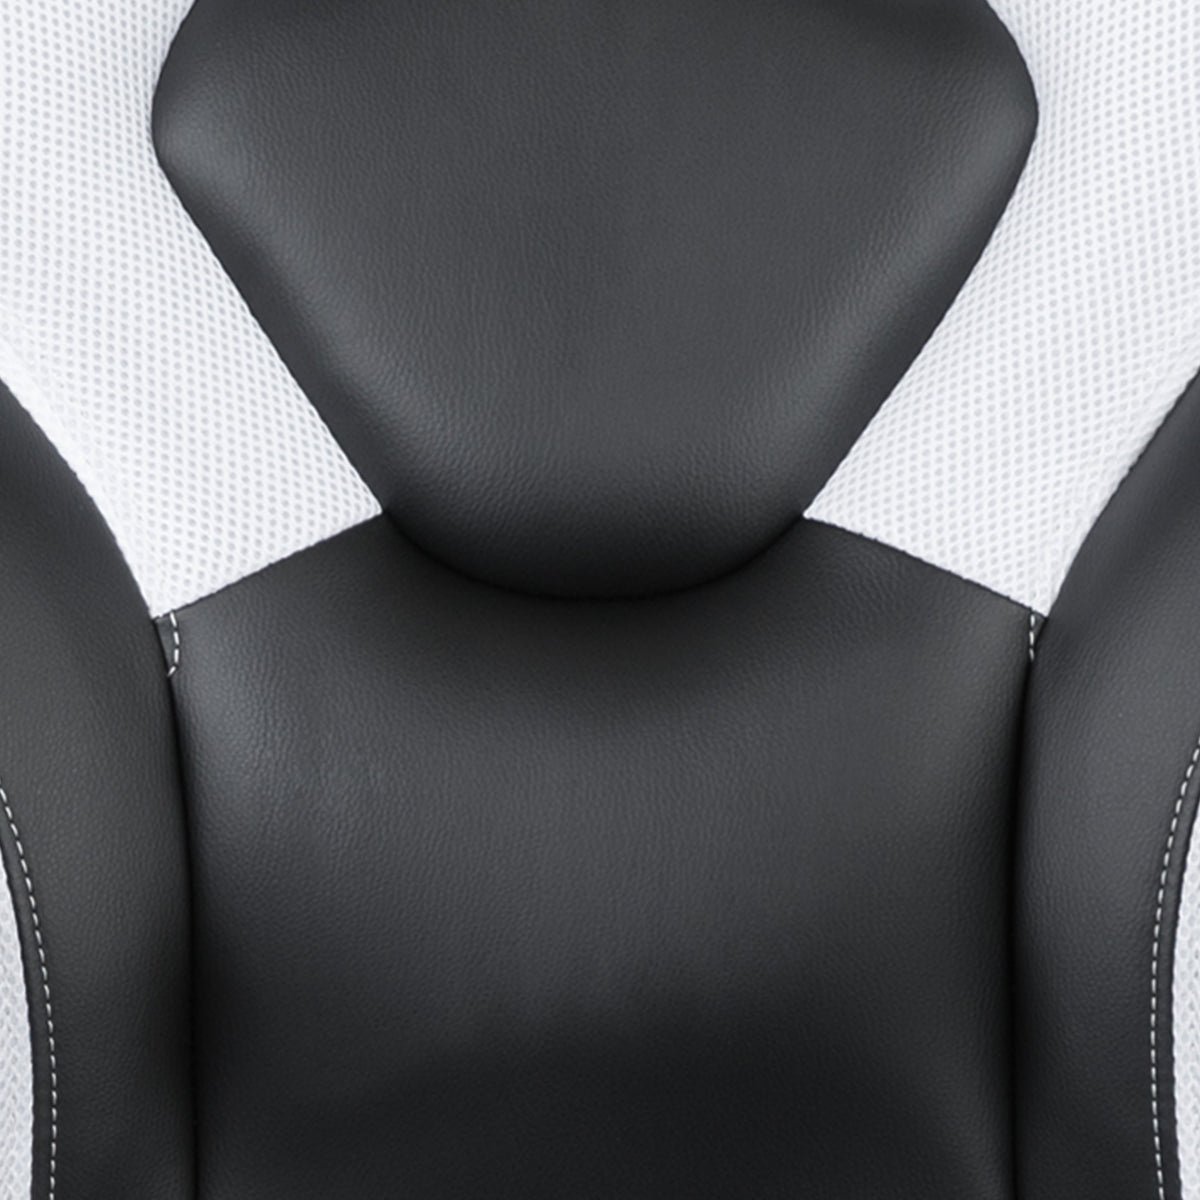 White |#| Ergonomic White and Black Computer Gaming Chair with Padded Flip-Up Arms